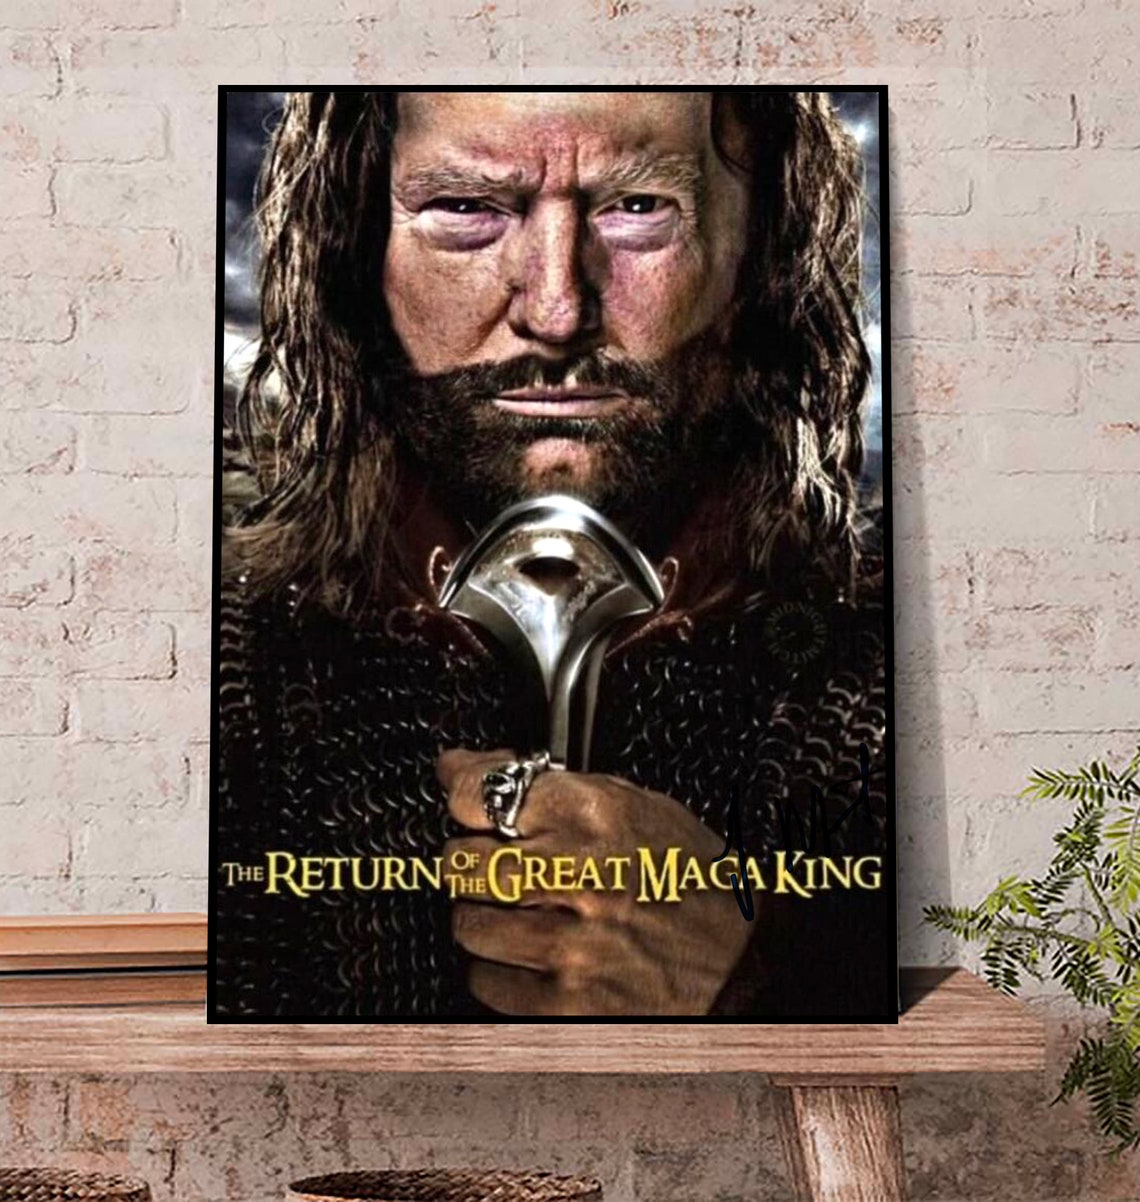 The Great Maga king Poster, The Reture of Dreat Maga King Poster, Trump Poster, Poster 